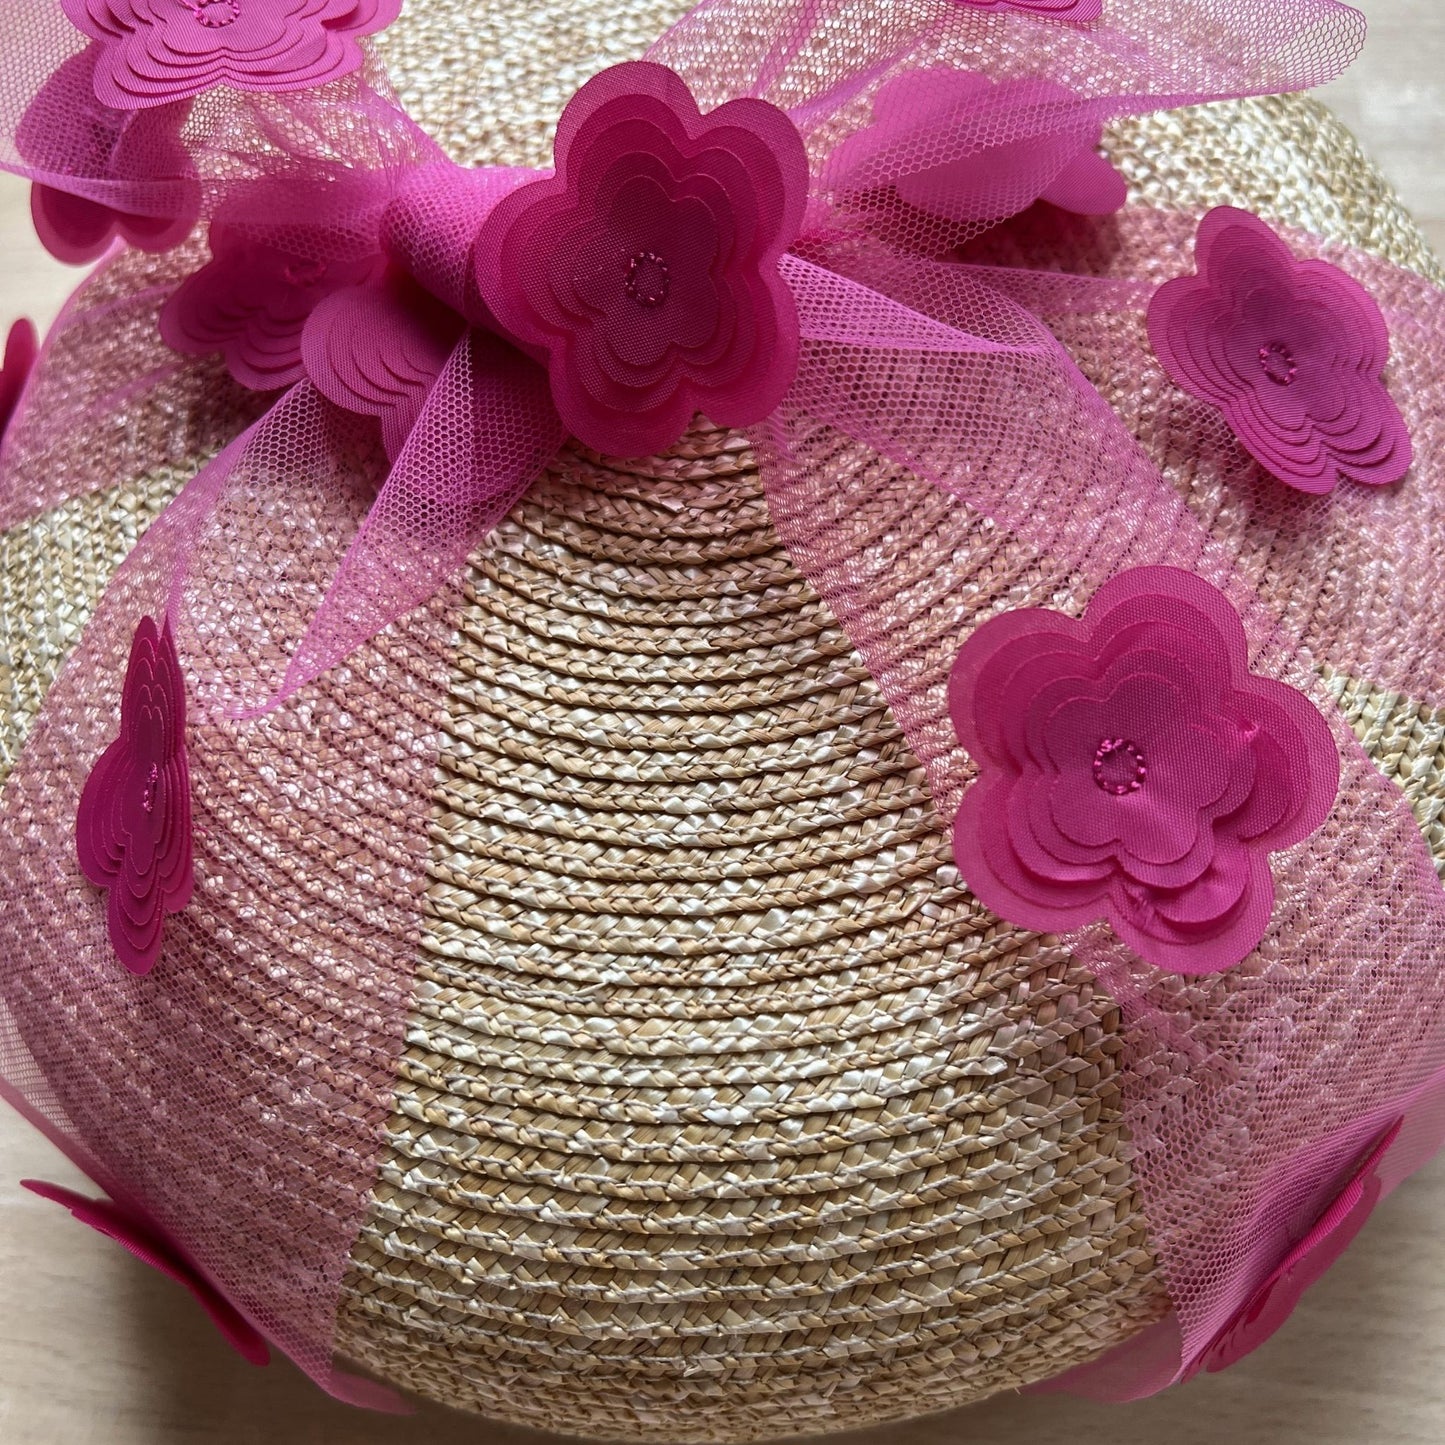 Straw Beret Hat with Pink Flowers for Women